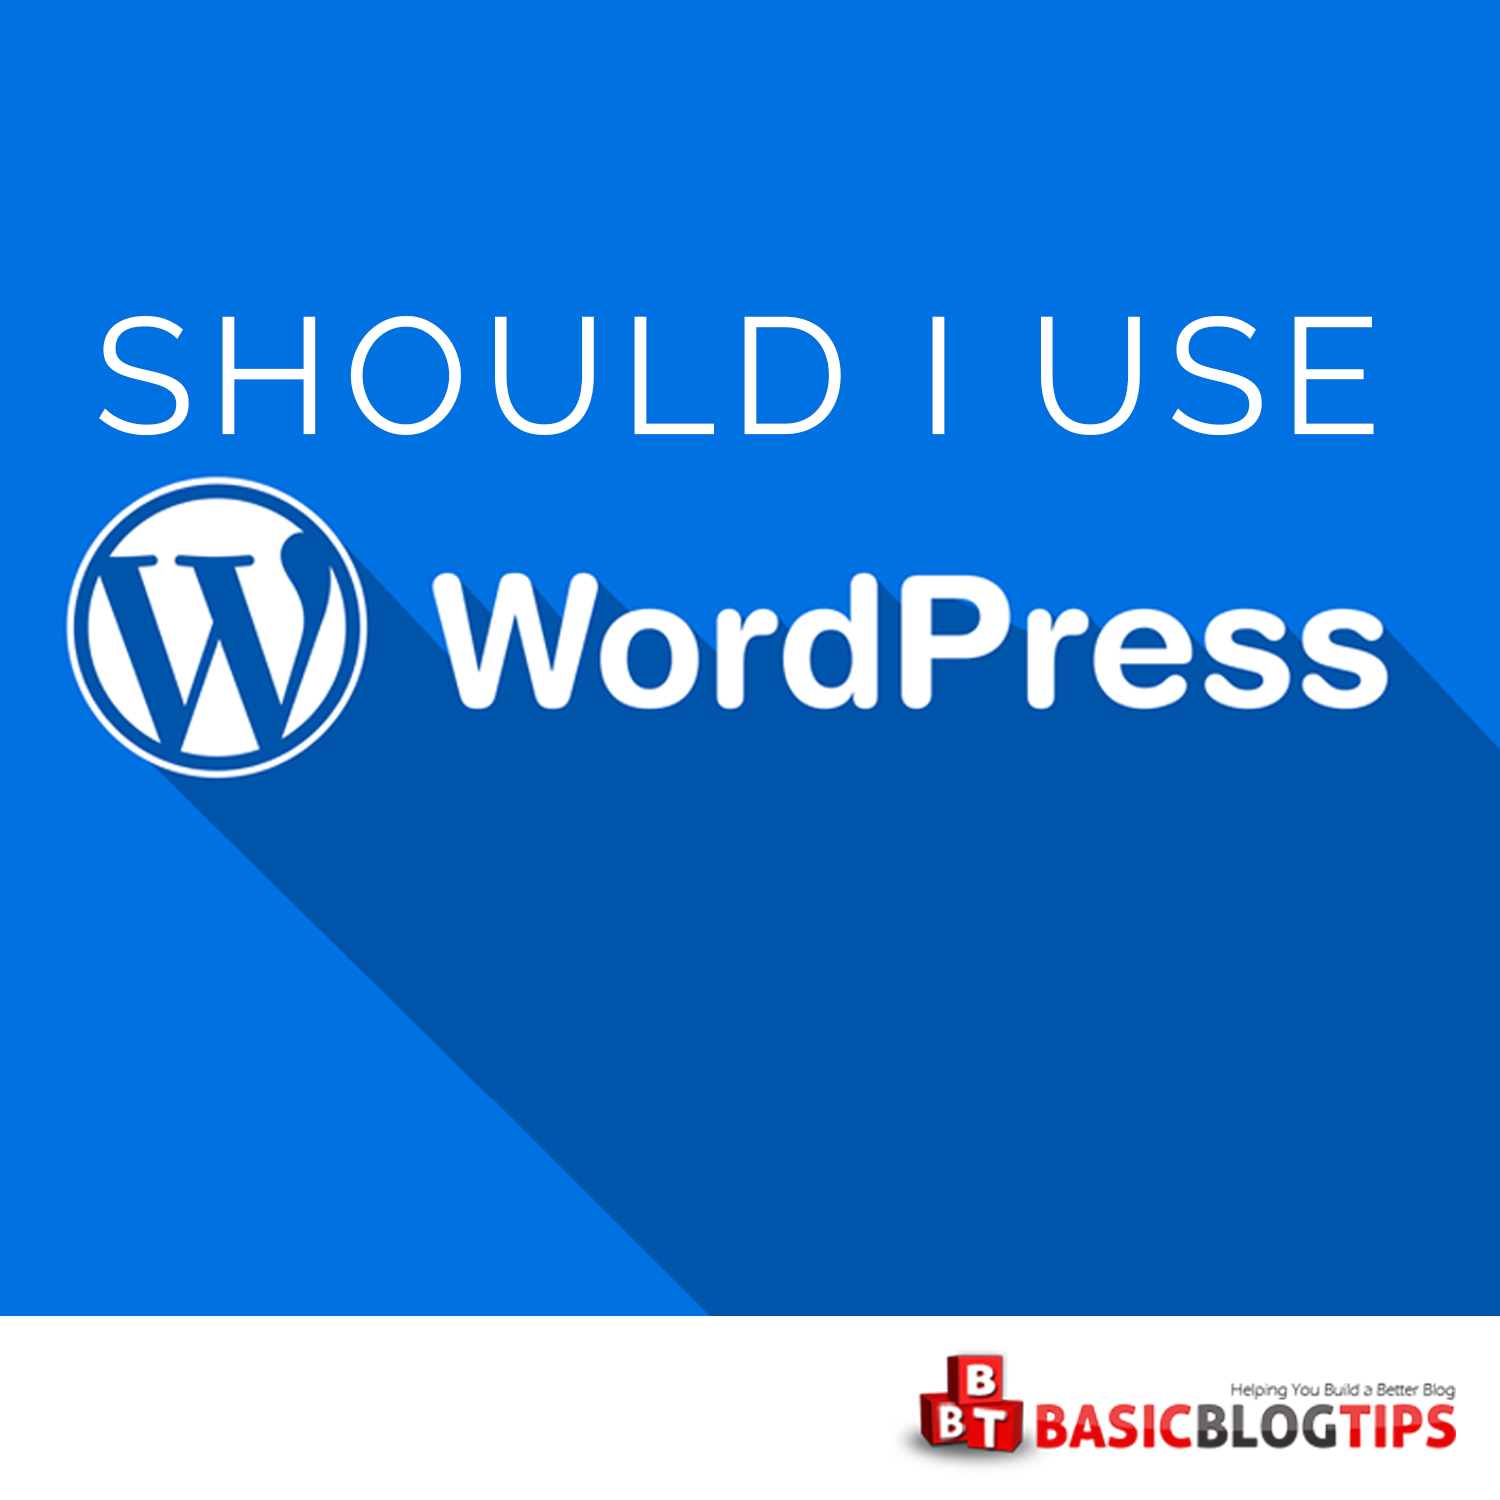 pros-and-cons-of-wordpress:-should-you-use-it-for-your-blog-or-not?